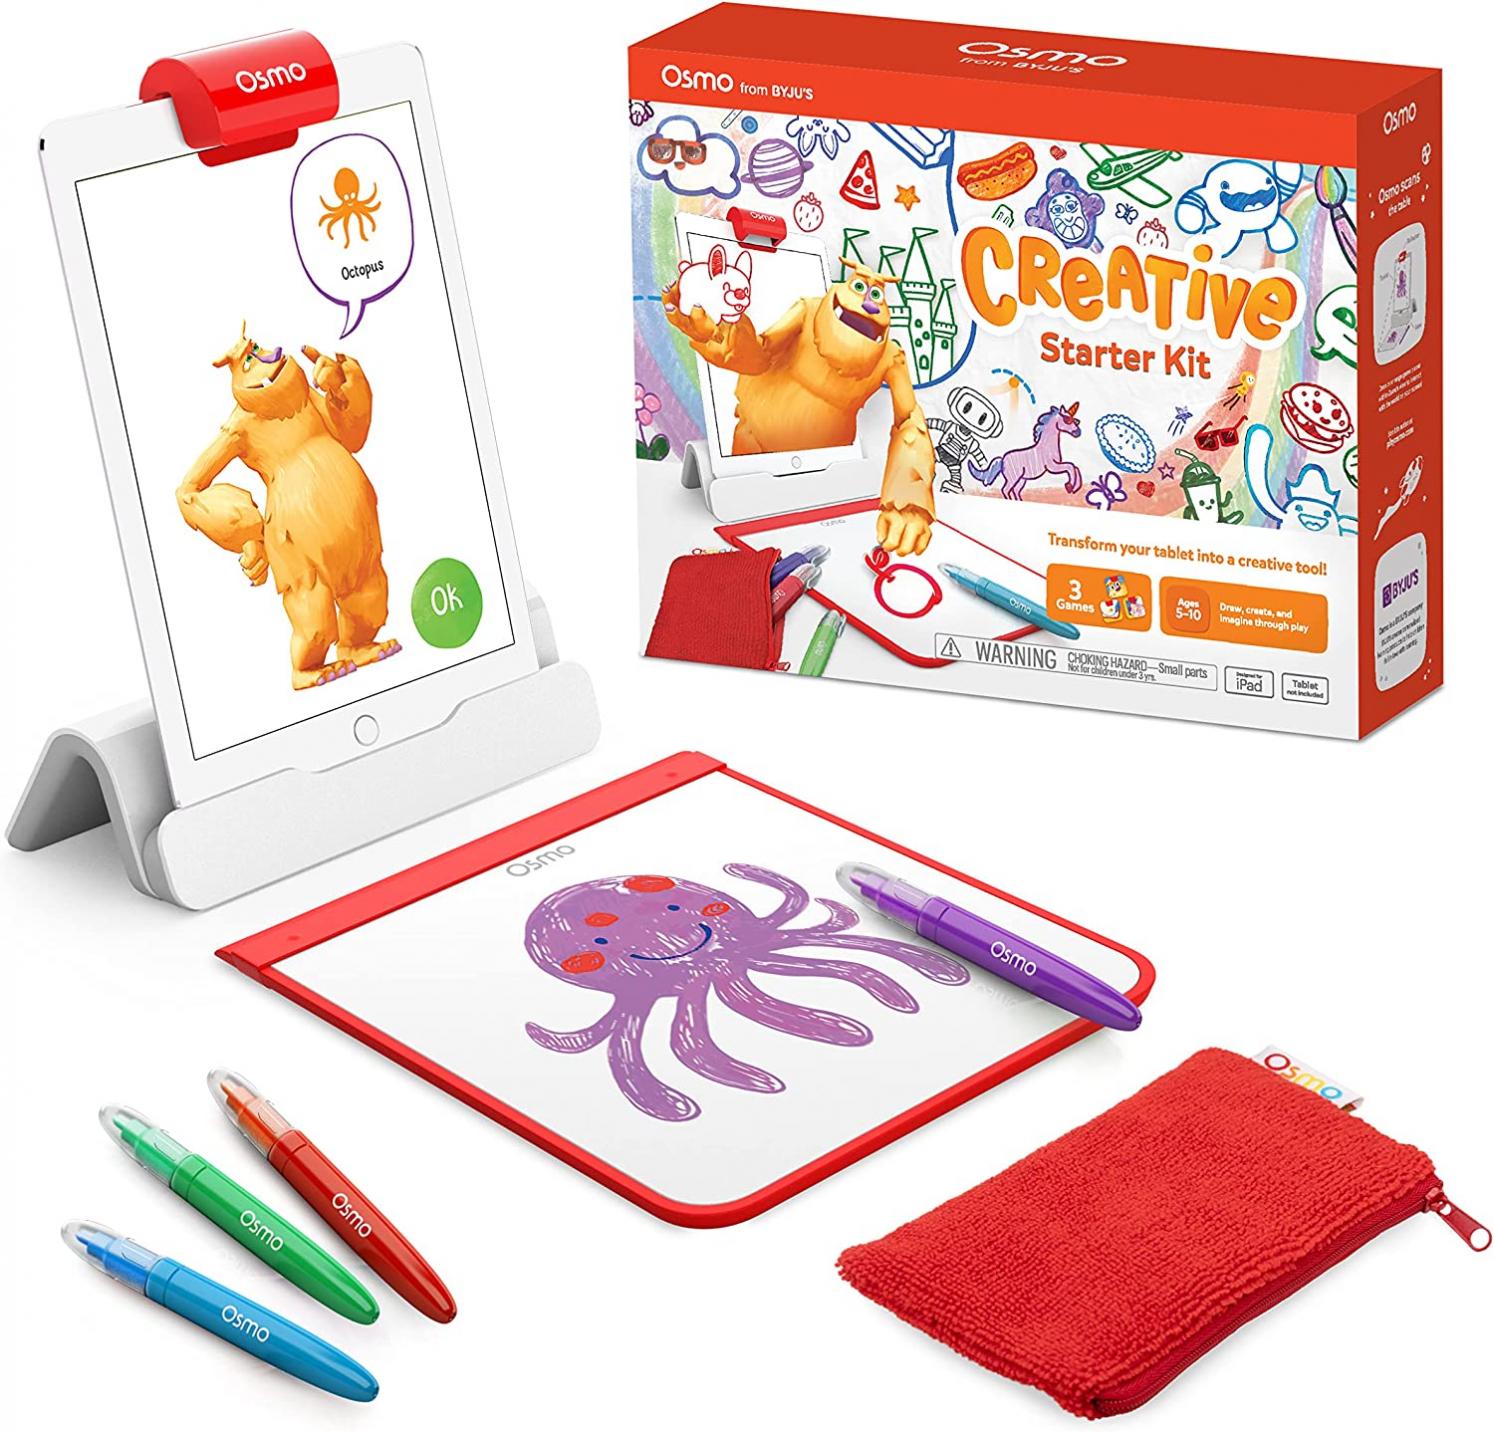 Osmo - Creative Starter Kit for iPad - 3 Educational Learning Games - Ages 5-10 - Drawing, Word Problems & Early Physics - STEM Toy Gifts for Kids, Boy & Girl - Ages 5 6 7 8 9 10 (Osmo Base Included)